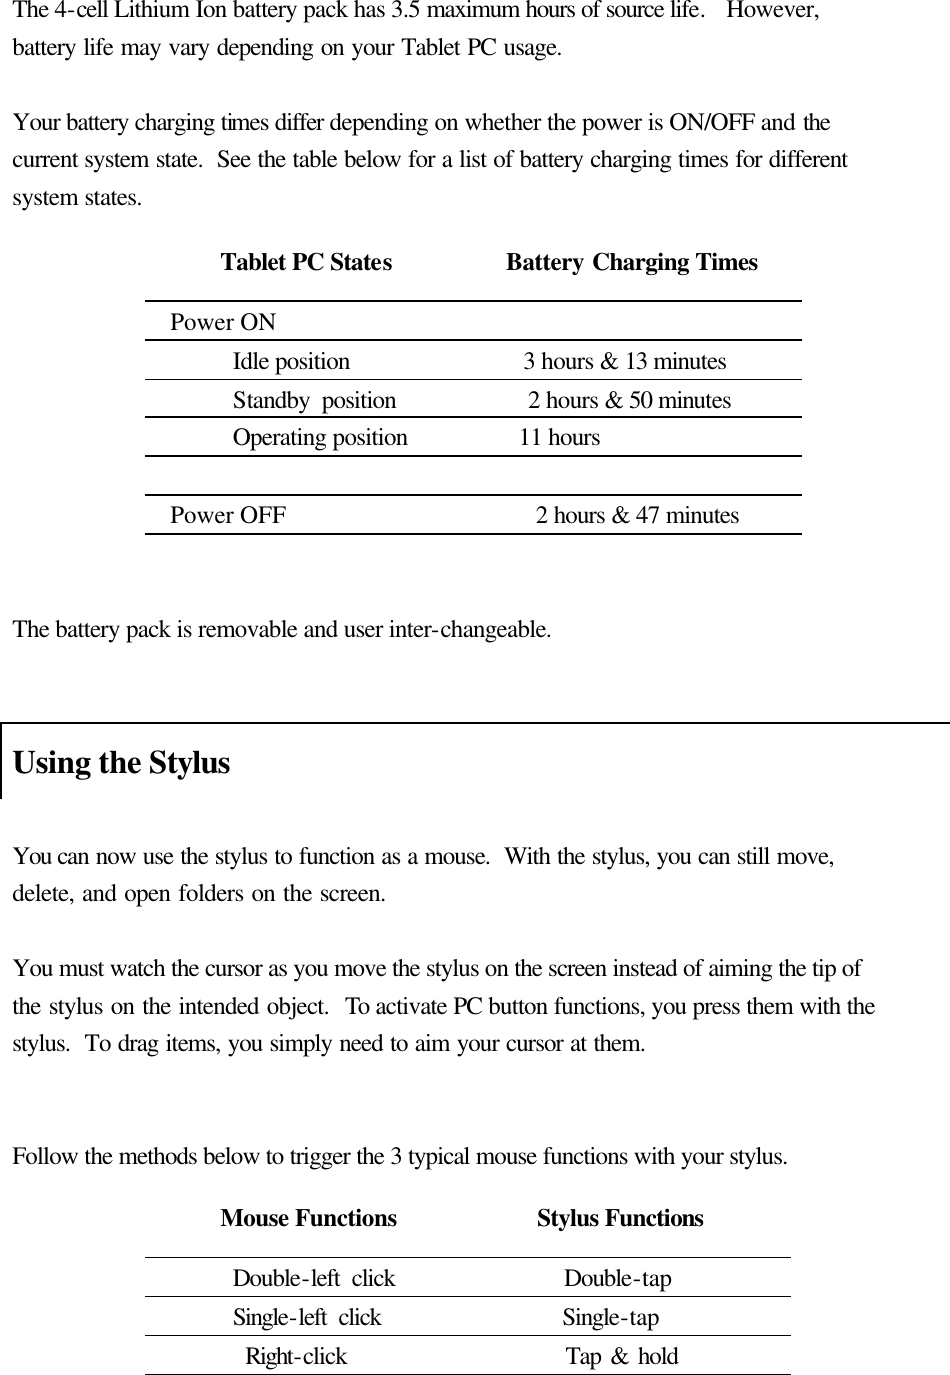  The 4-cell Lithium Ion battery pack has 3.5 maximum hours of source life.  However, battery life may vary depending on your Tablet PC usage.    Your battery charging times differ depending on whether the power is ON/OFF and the current system state.  See the table below for a list of battery charging times for different system states.             The battery pack is removable and user inter-changeable.     Using the Stylus  You can now use the stylus to function as a mouse.  With the stylus, you can still move, delete, and open folders on the screen.    You must watch the cursor as you move the stylus on the screen instead of aiming the tip of the stylus on the intended object.  To activate PC button functions, you press them with the stylus.  To drag items, you simply need to aim your cursor at them.   Follow the methods below to trigger the 3 typical mouse functions with your stylus.          Tablet PC States         Battery Charging Times   Power ON   Idle position              3 hours &amp; 13 minutes Standby position           2 hours &amp; 50 minutes       Operating position         11 hours  Power OFF                    2 hours &amp; 47 minutes  Mouse Functions           Stylus Functions       Double-left click              Double-tap       Single-left click               Single-tap        Right-click                  Tap &amp; hold  